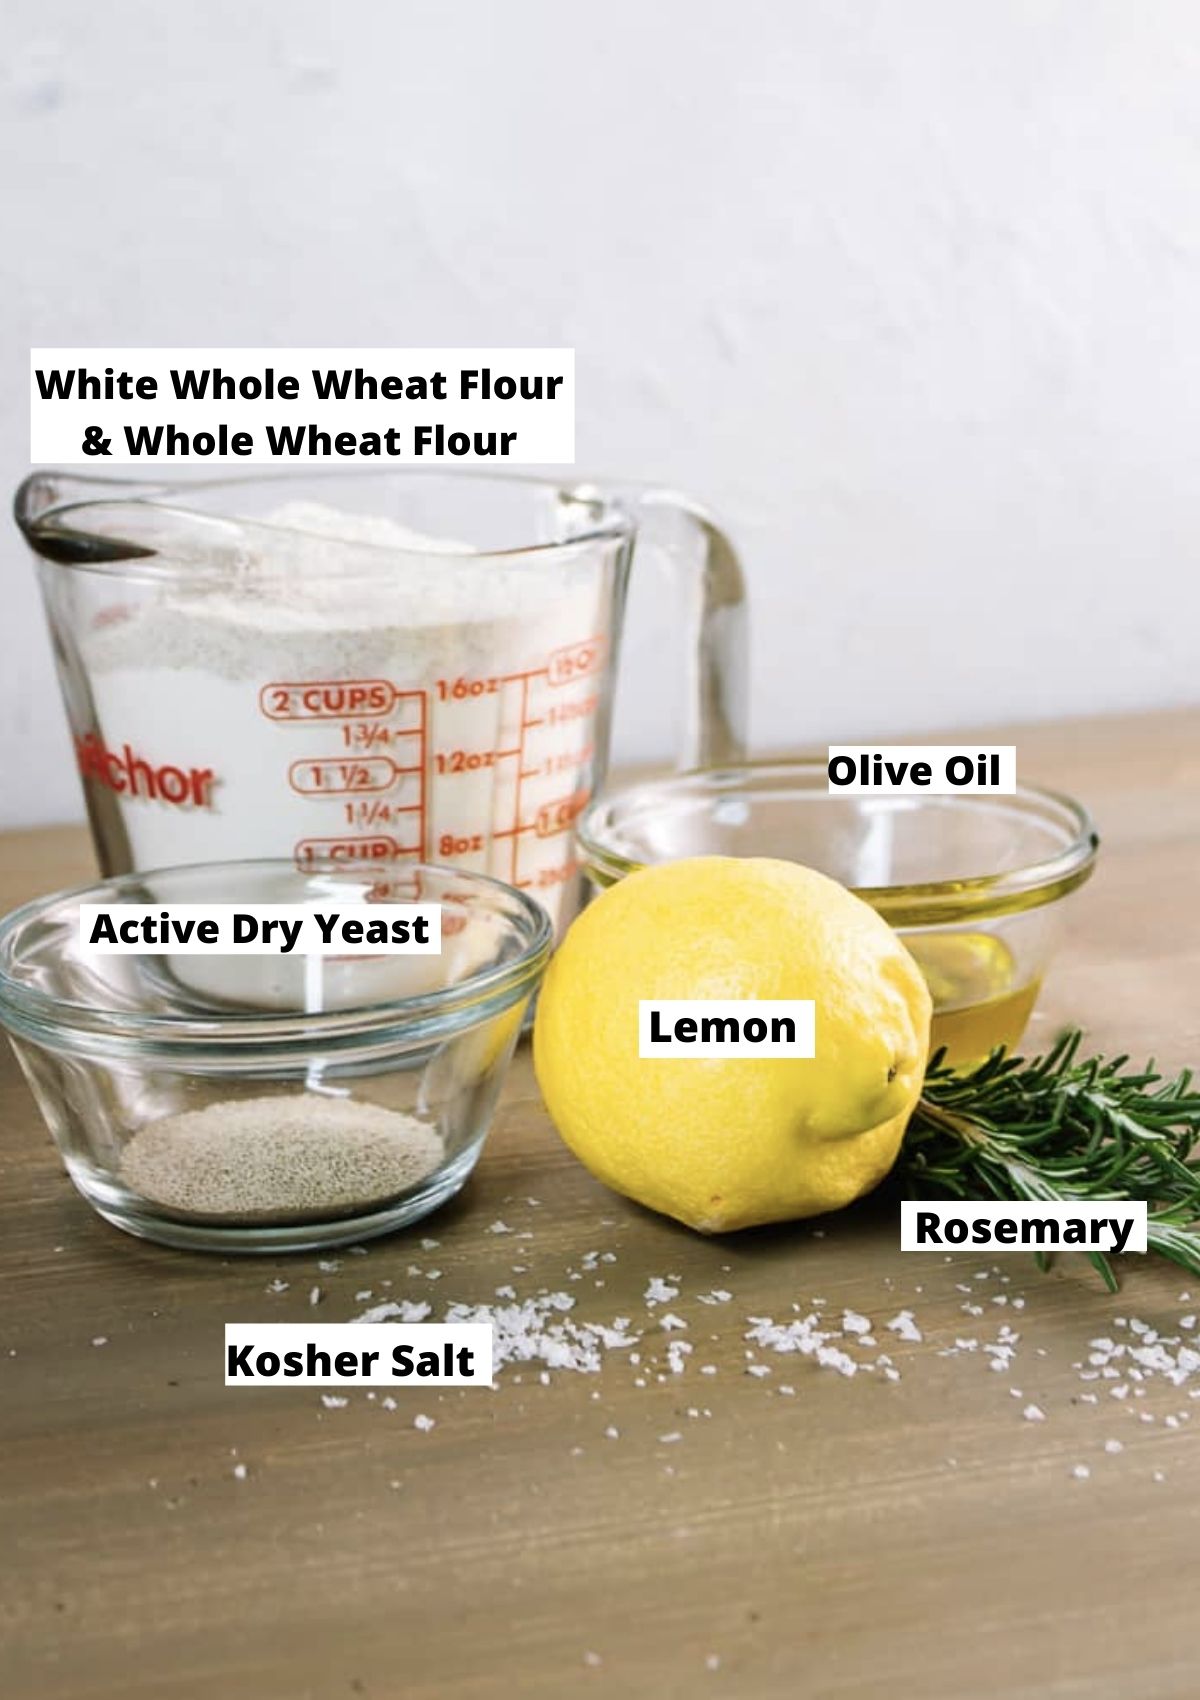 Cup of flour, bowl of dry yeast, olive oil in a bowl, lemon, fresh rosemary, and salt on table top. 